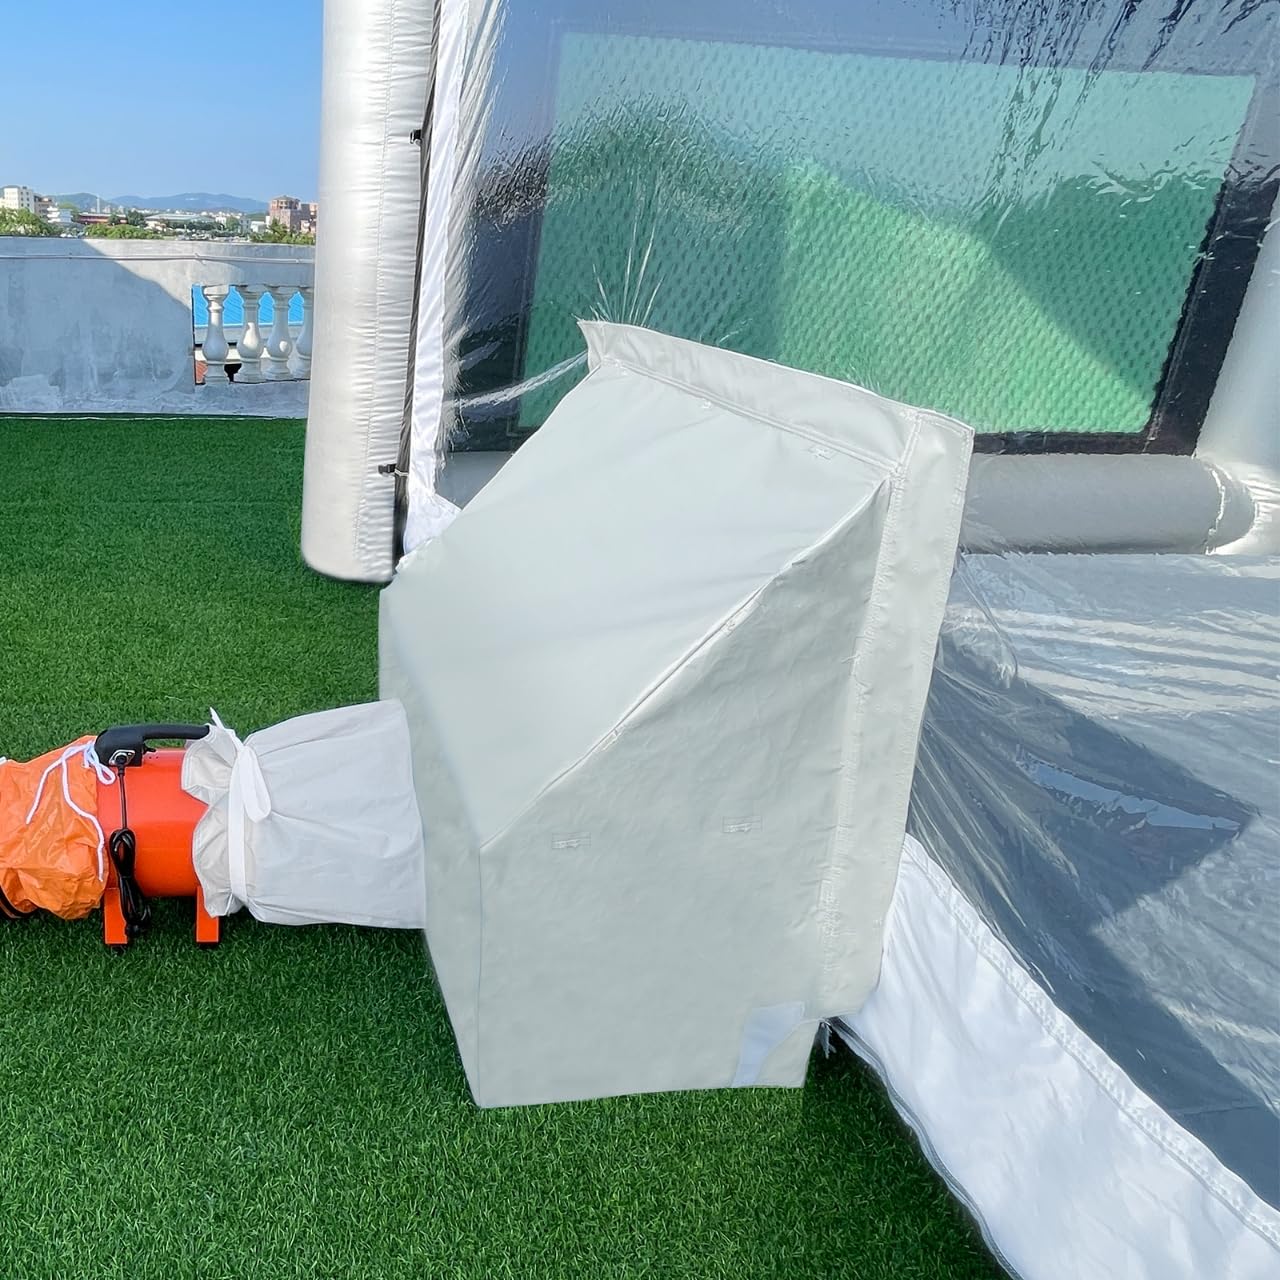 Inflatable Paint Booth Oversized Exhaust Ventilation Device with Efficient Filter Box, Helping Solve Overspray & Environmentally-Friendly(ONLY